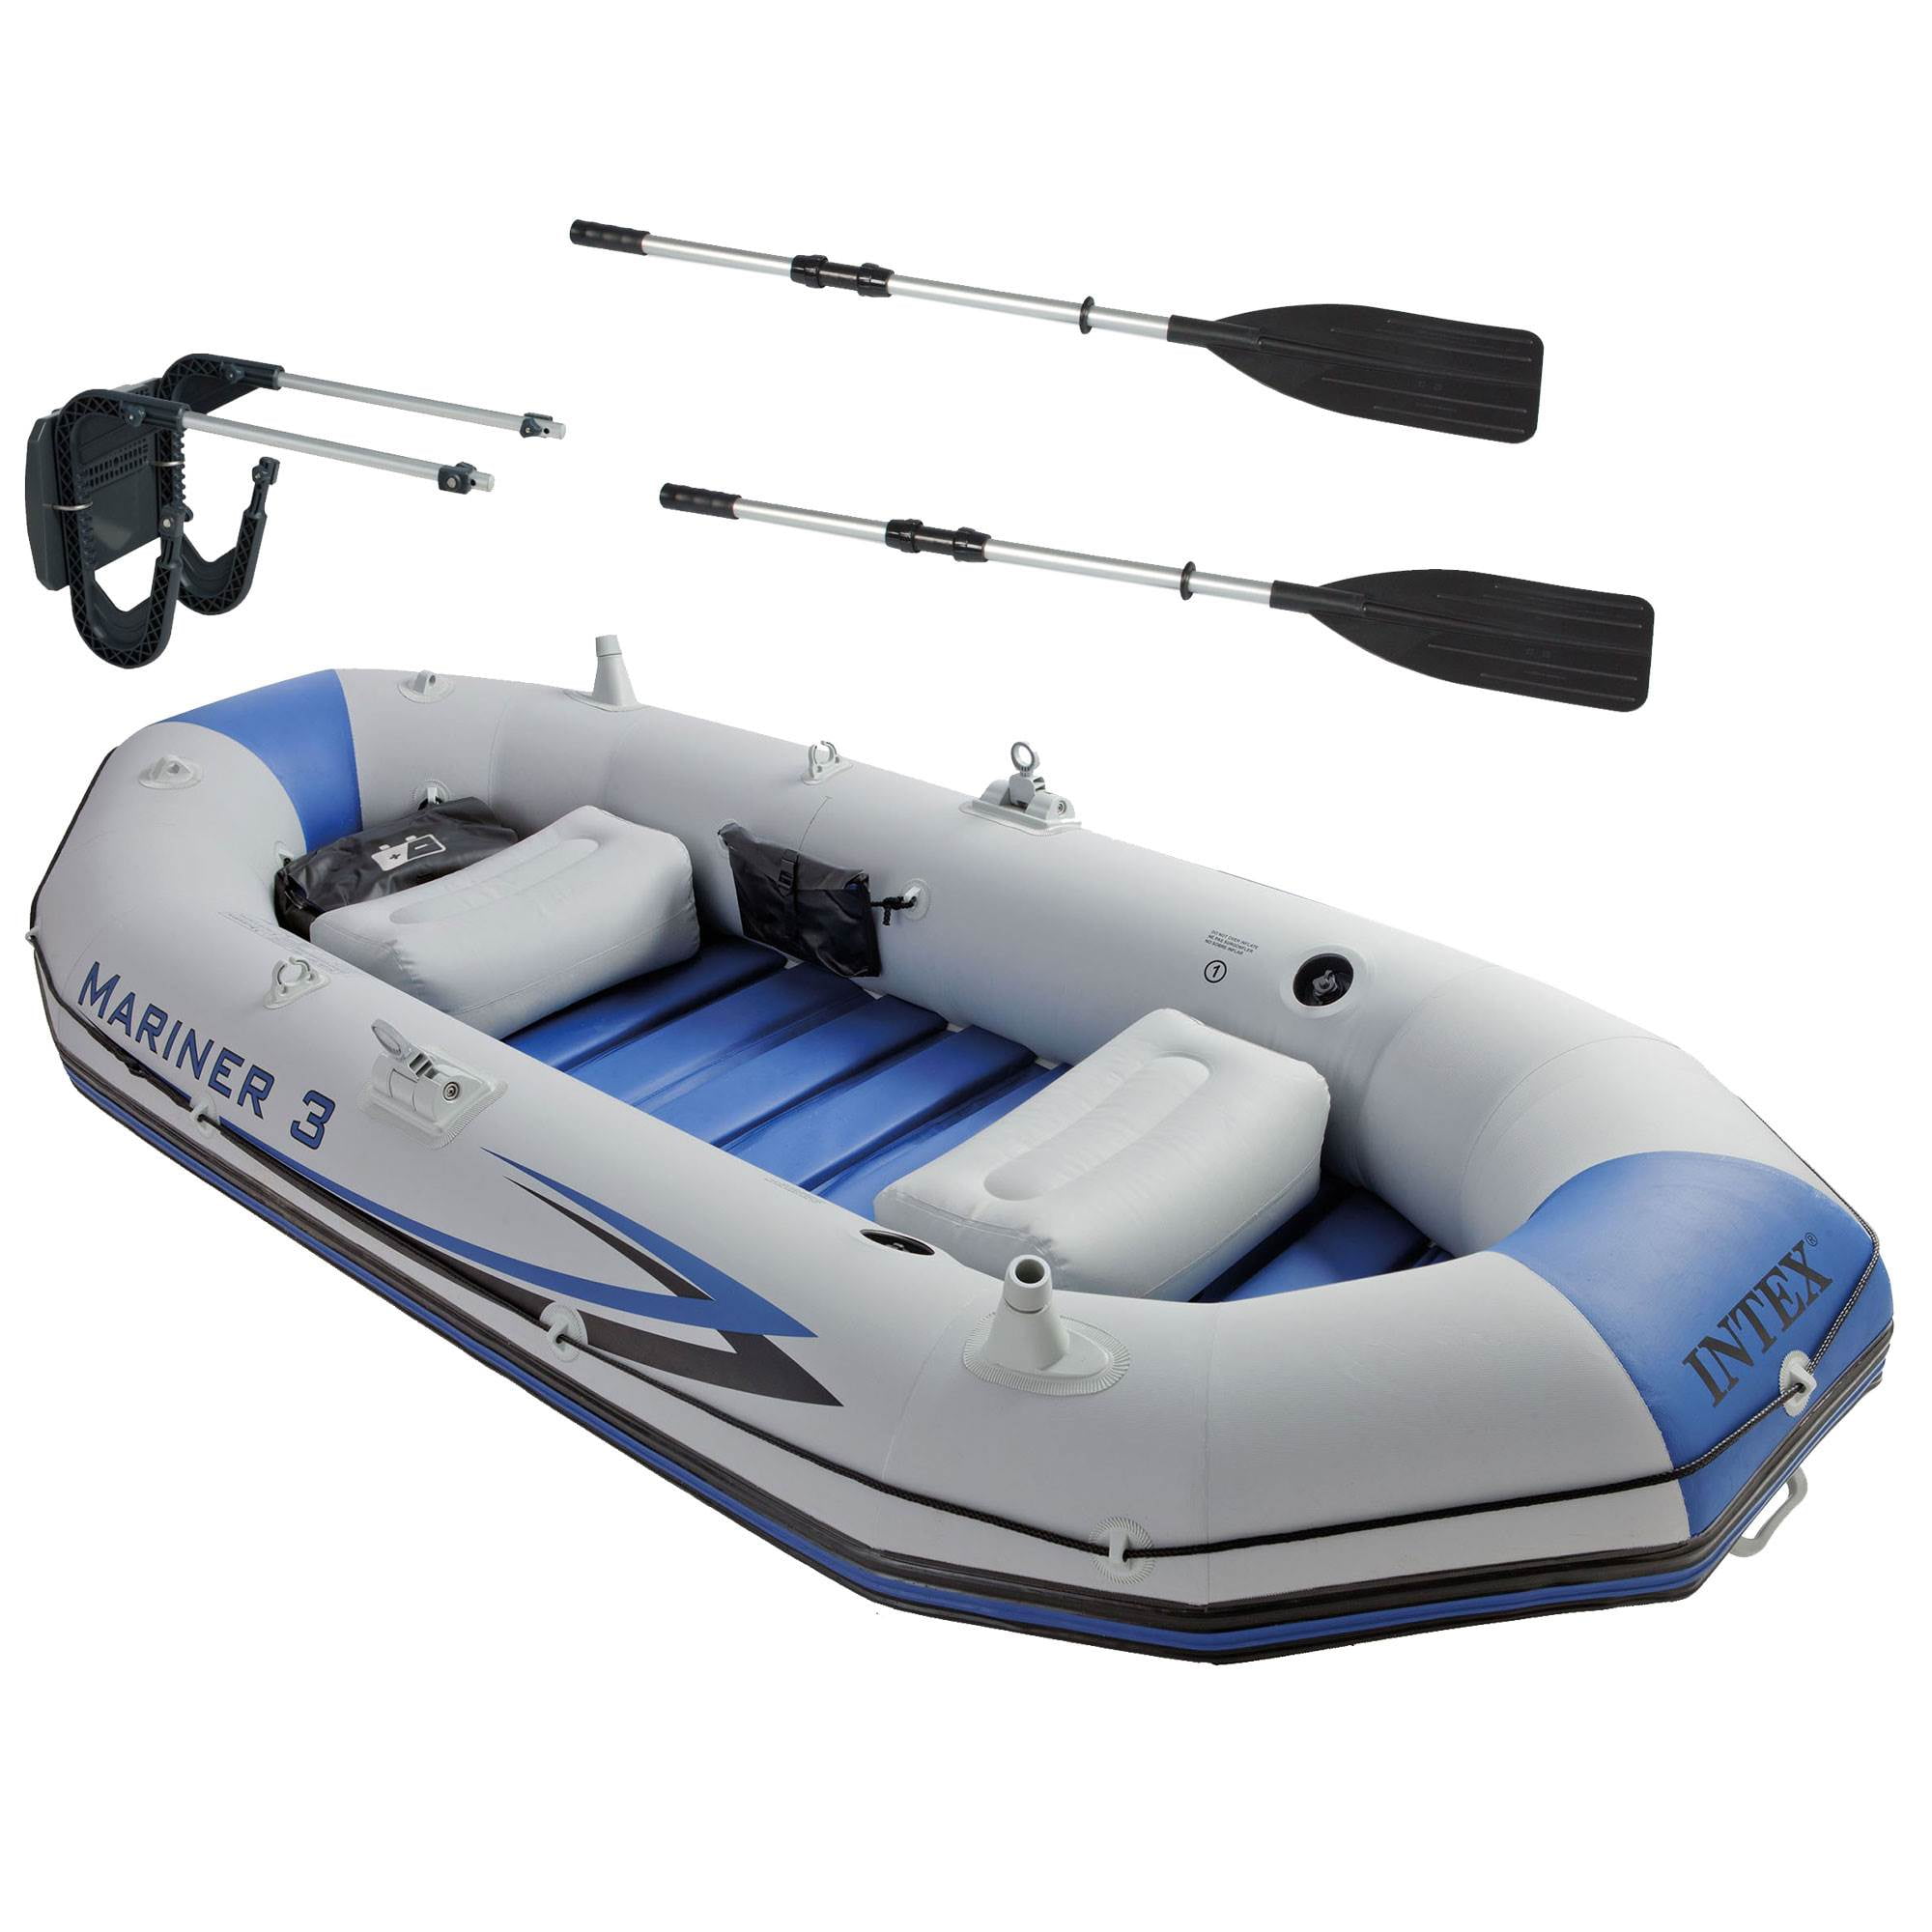 Intex Mariner 4-Person Inflatable River Lake Dinghy Boat and Oars Set68376EP 